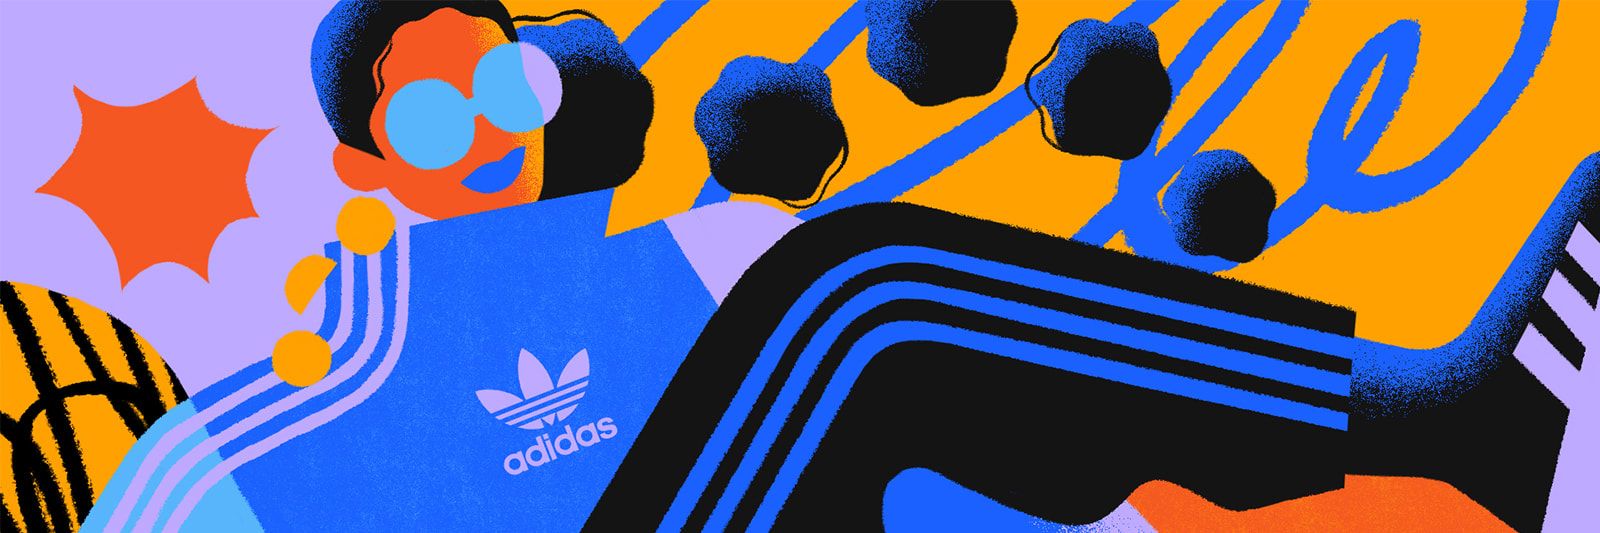 A colorful illustration of a person wearing an Adidas shirt. - Adidas